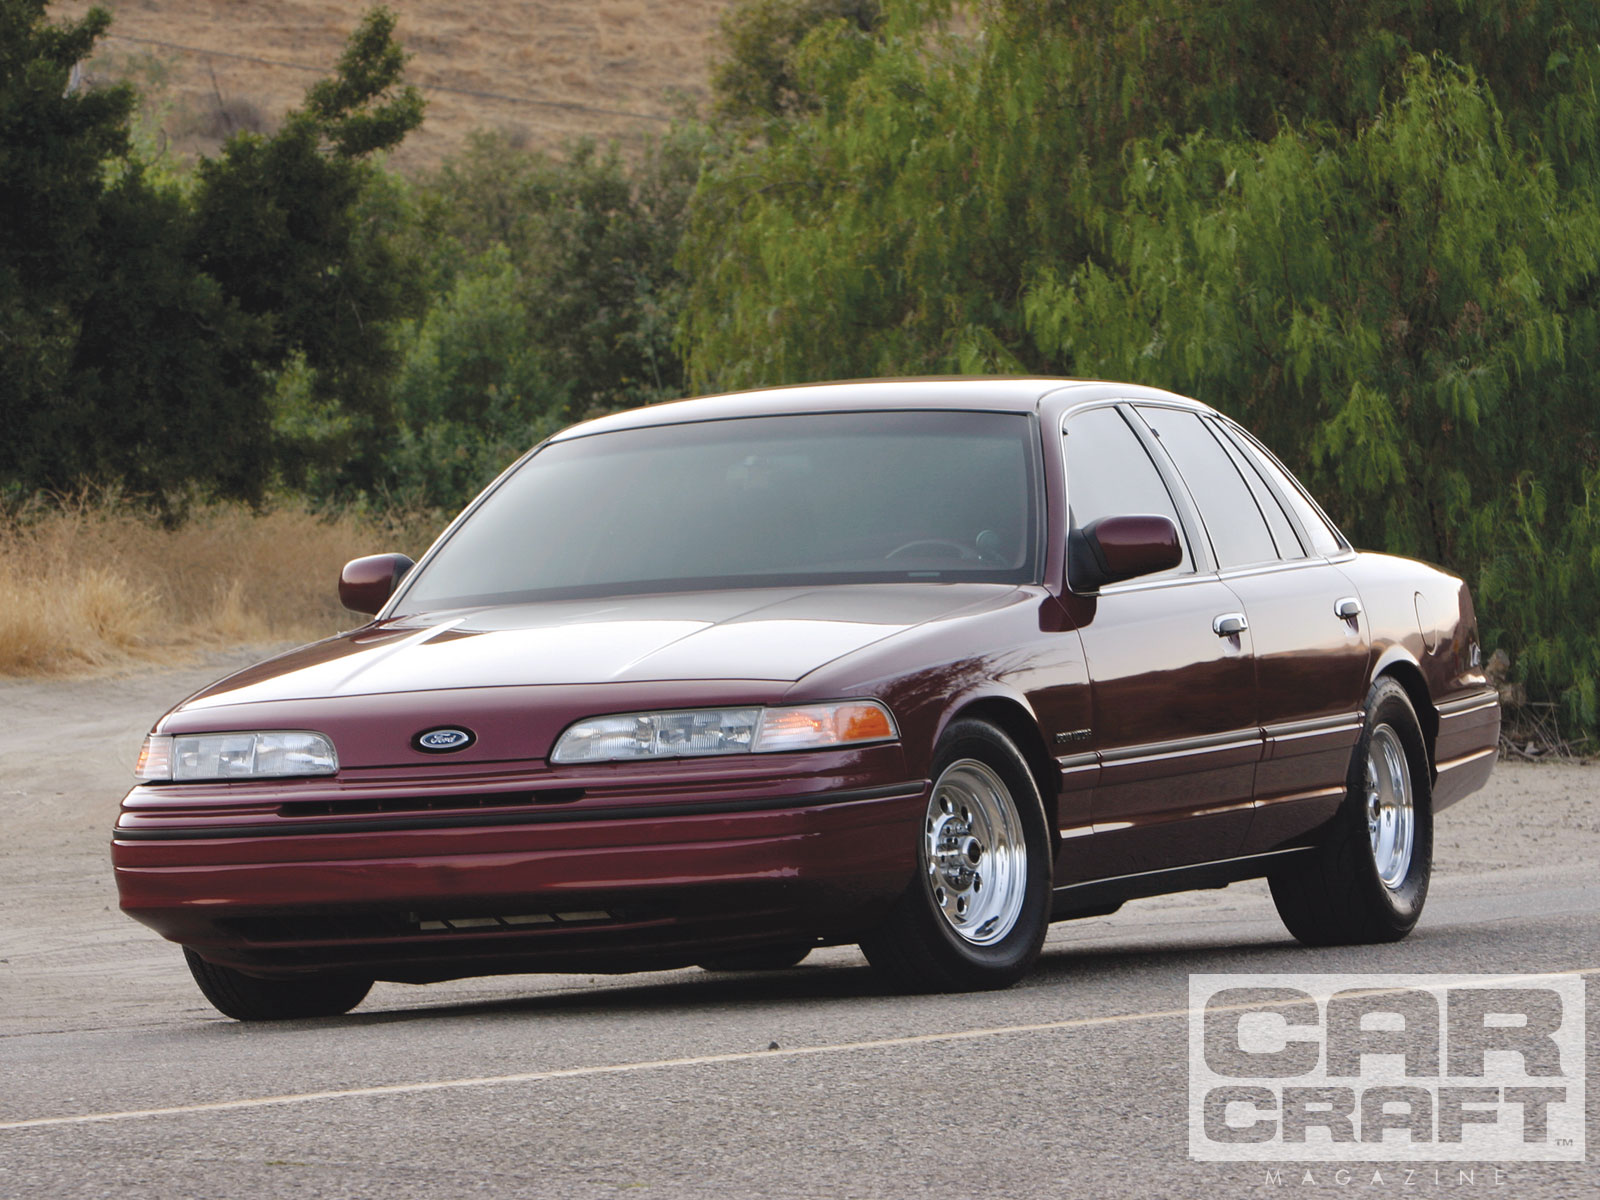 1992 Ford Crown Victoria - The Rocket Couch